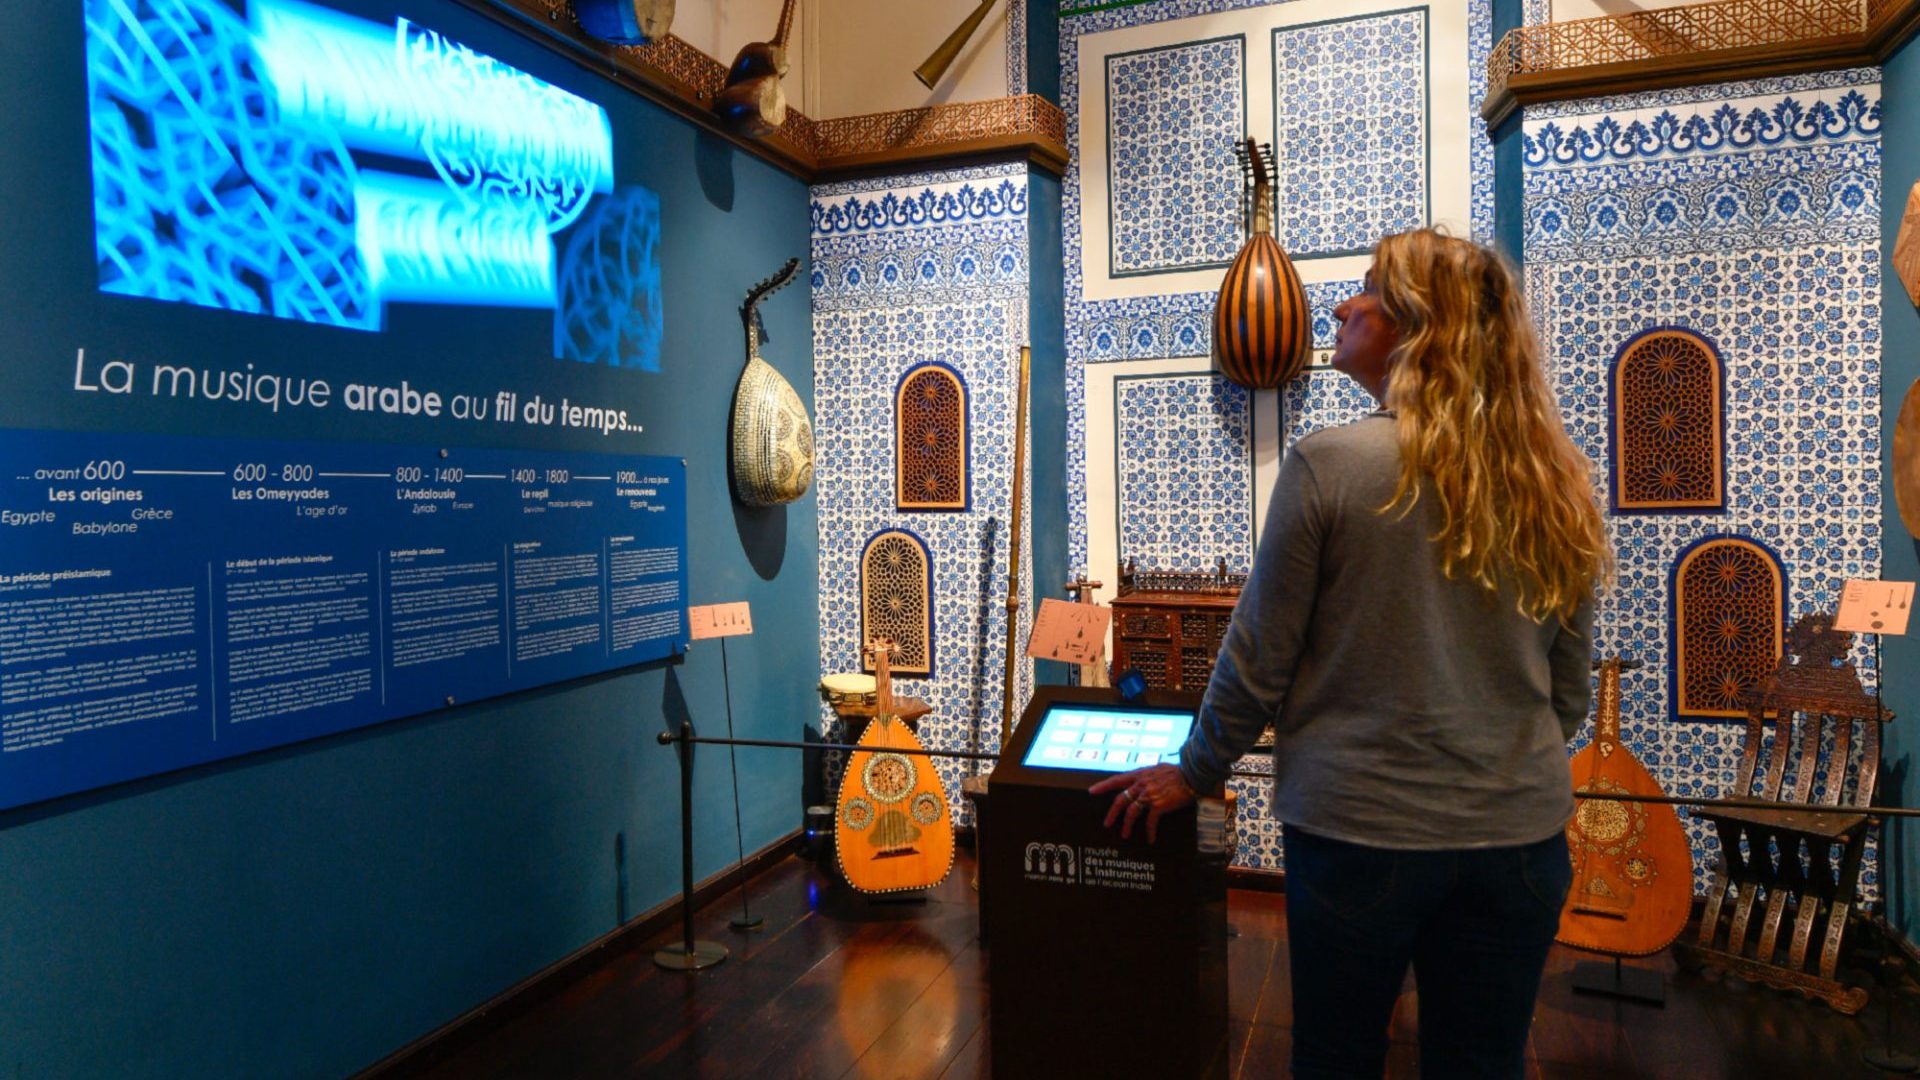 Woman looking at musical instruments in the Museum of Indian Ocean Music and Instruments.